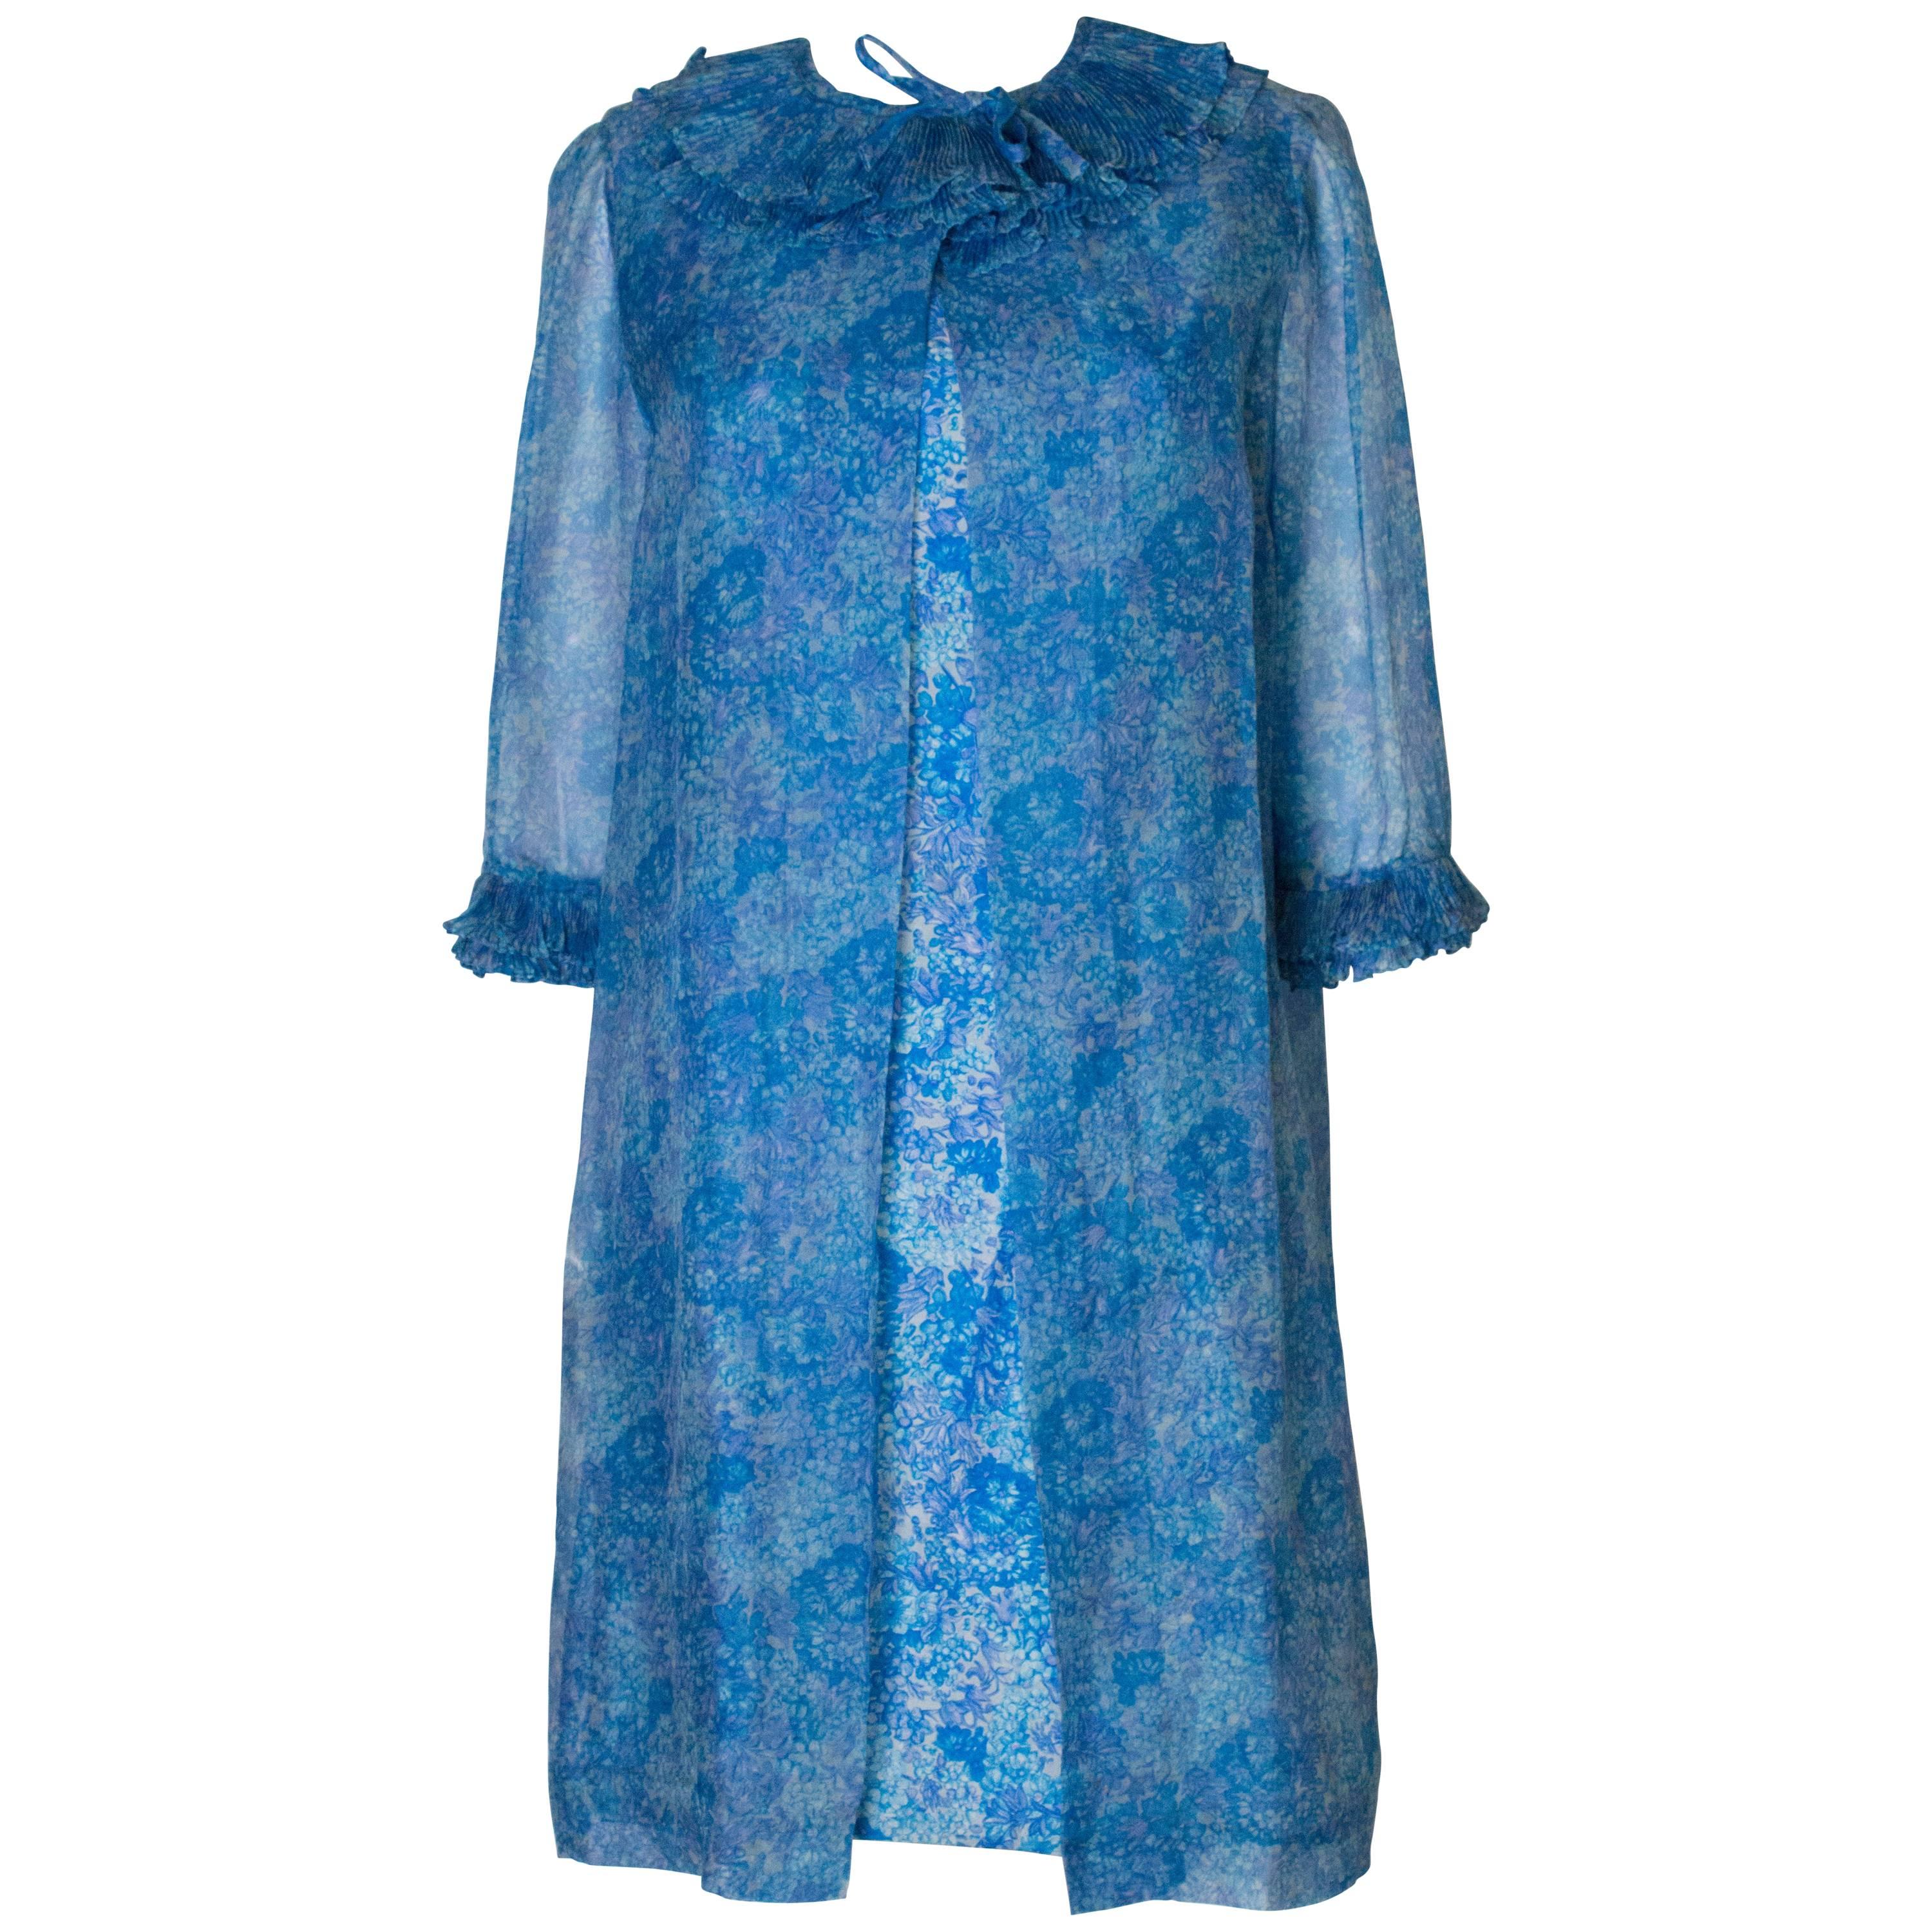 A Vintage 1960s blue printed Cocktail Dress and sheer matching Jacket